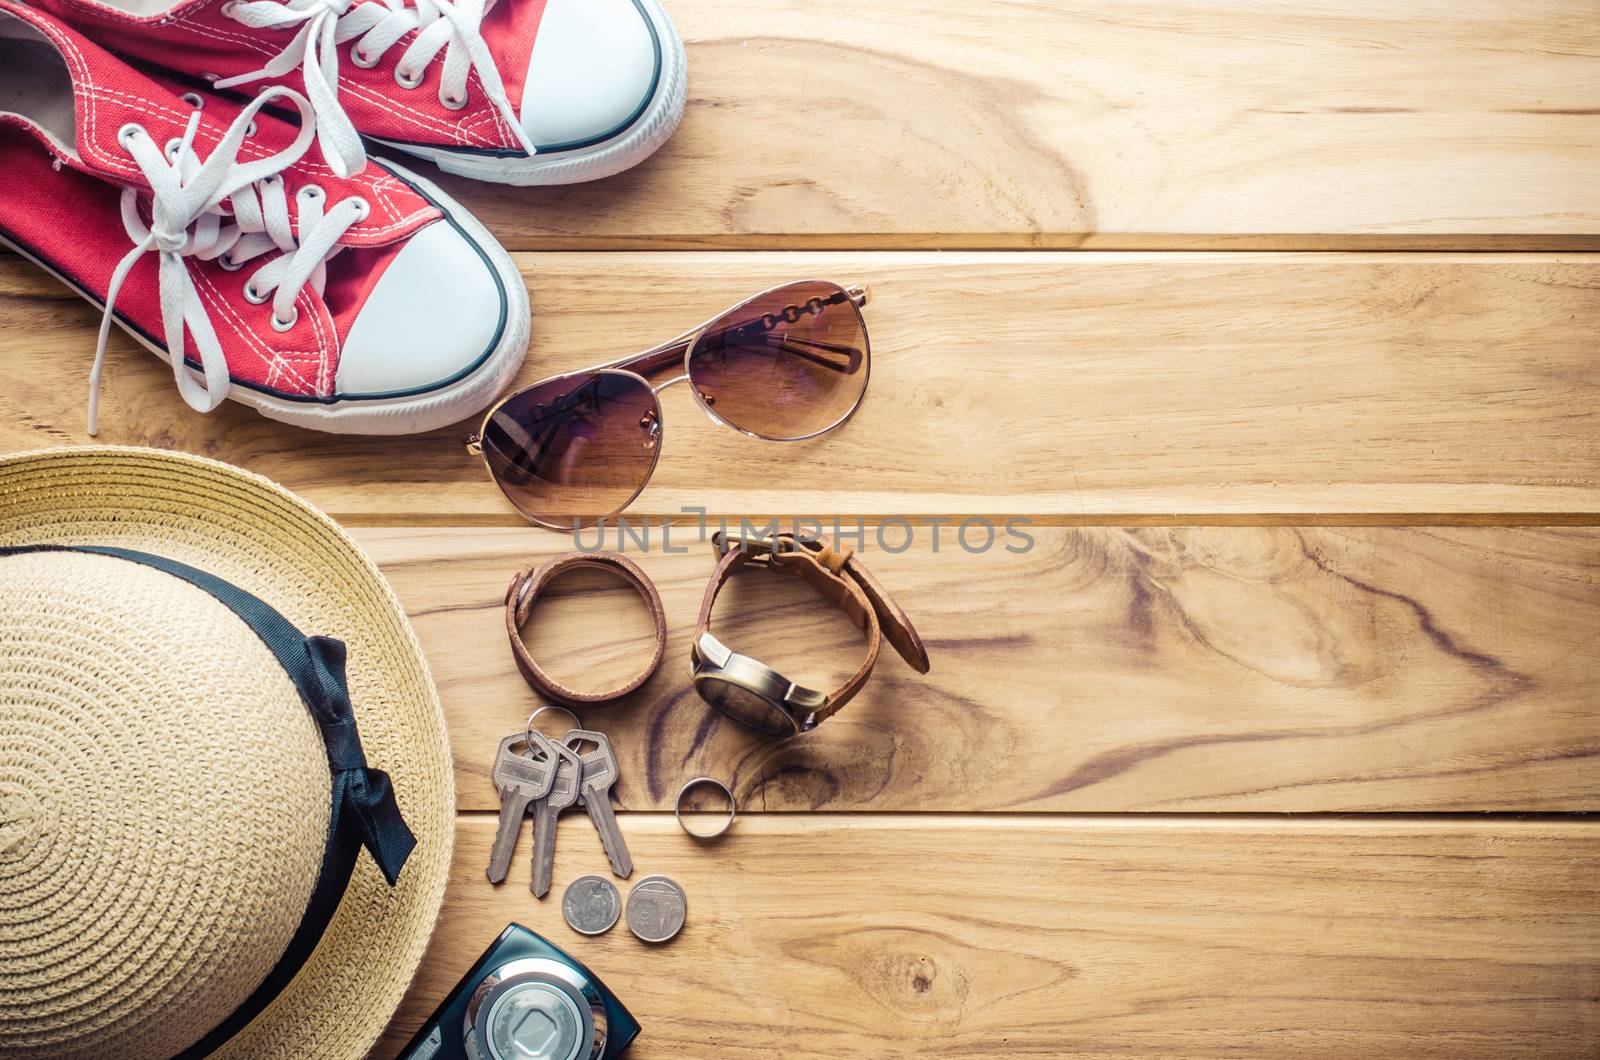 Clothing and accessories for travel on wood floor by photobyphotoboy